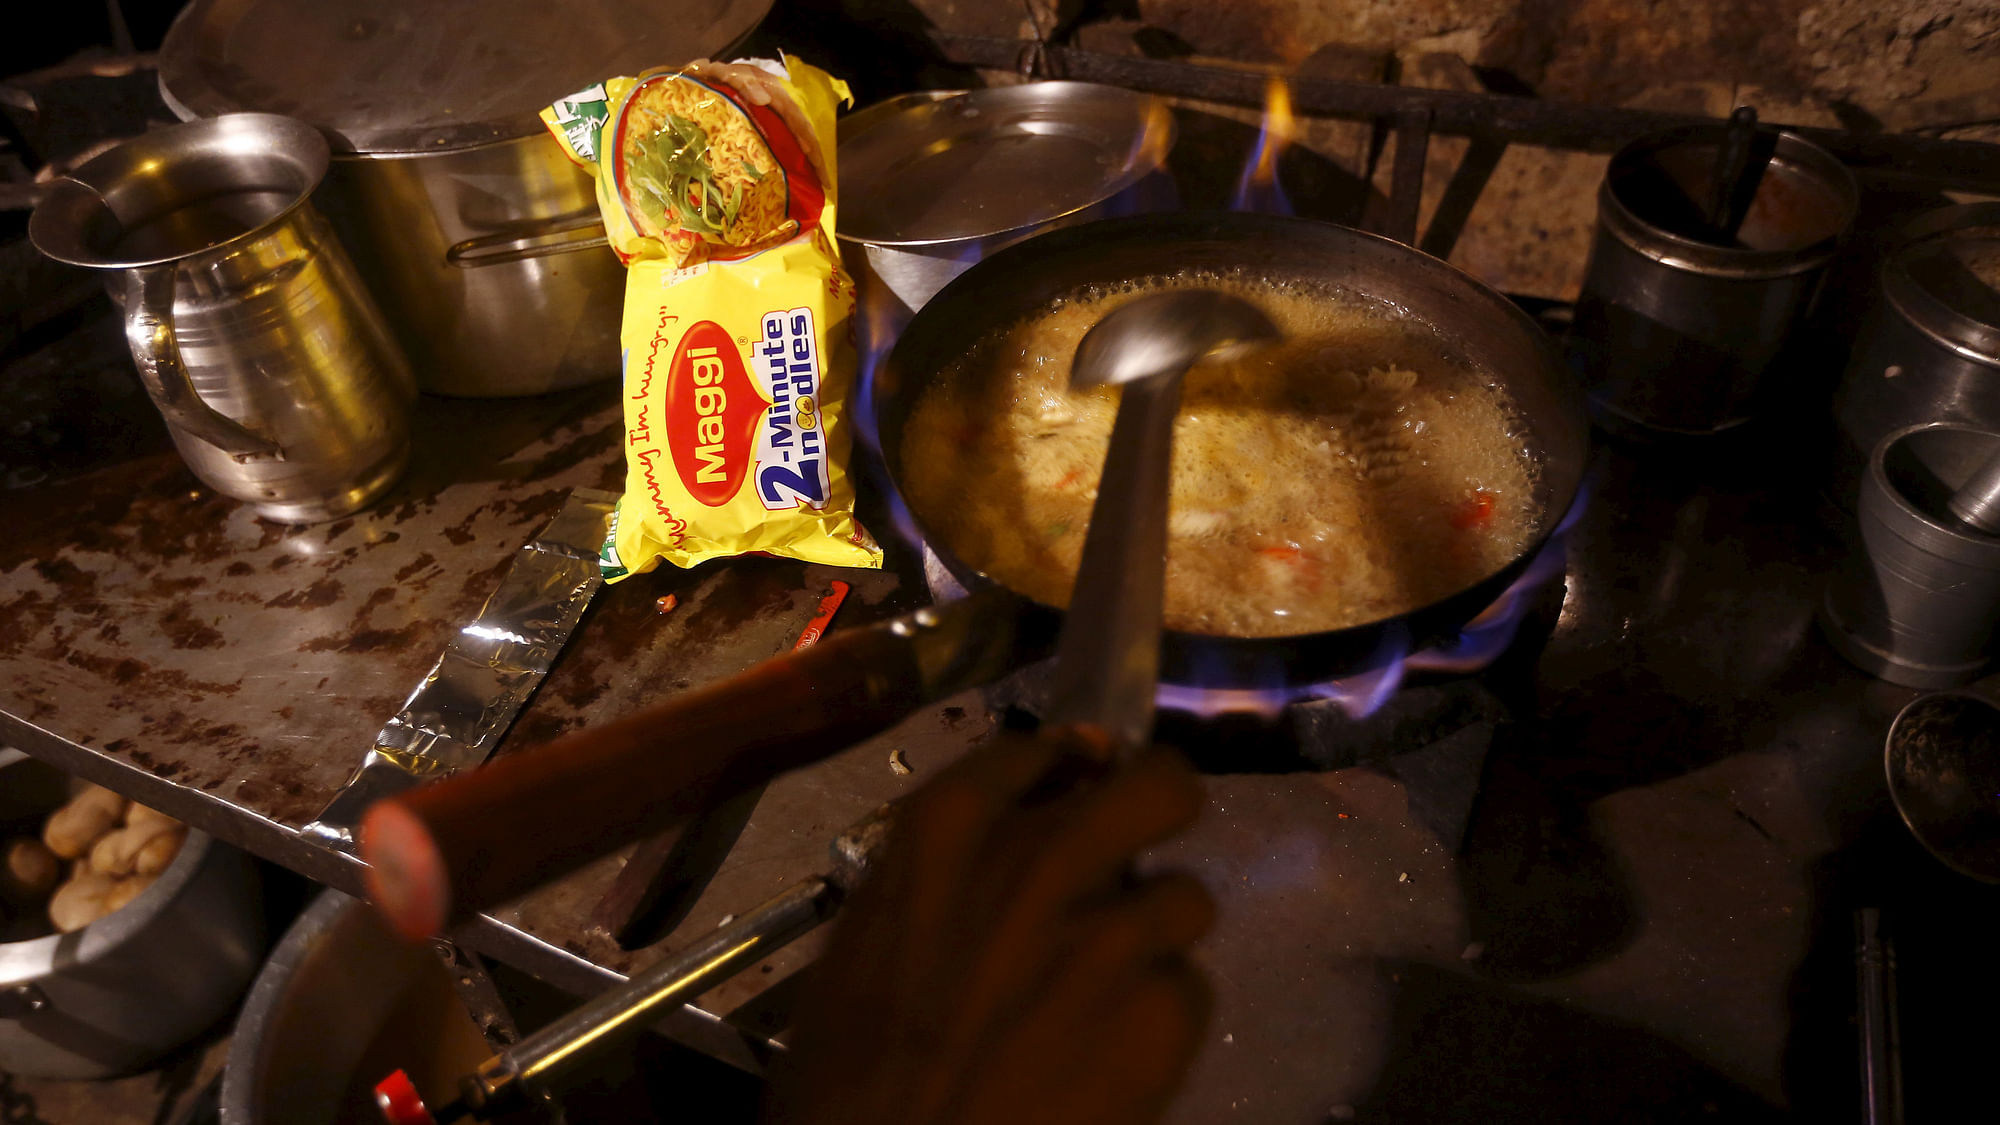 Packets of Nestle’s Maggi instant noodles are seen on display at a grocery store in Mumbai, India. (Photo: Reuters)